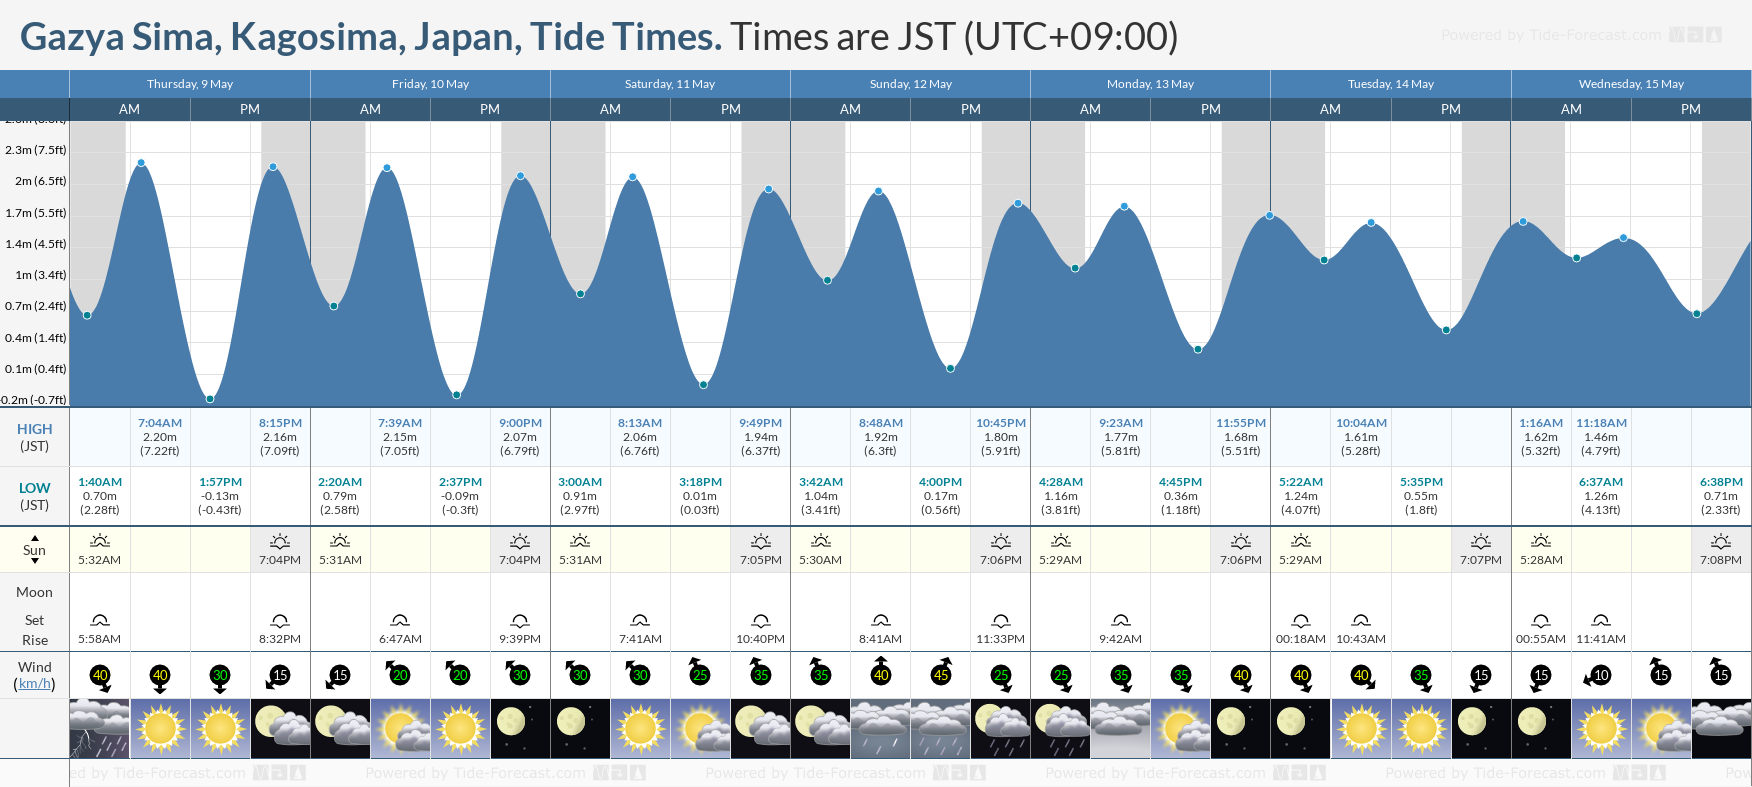 Gazya Sima, Kagosima, Japan Tide Chart including high and low tide times for the next 7 days